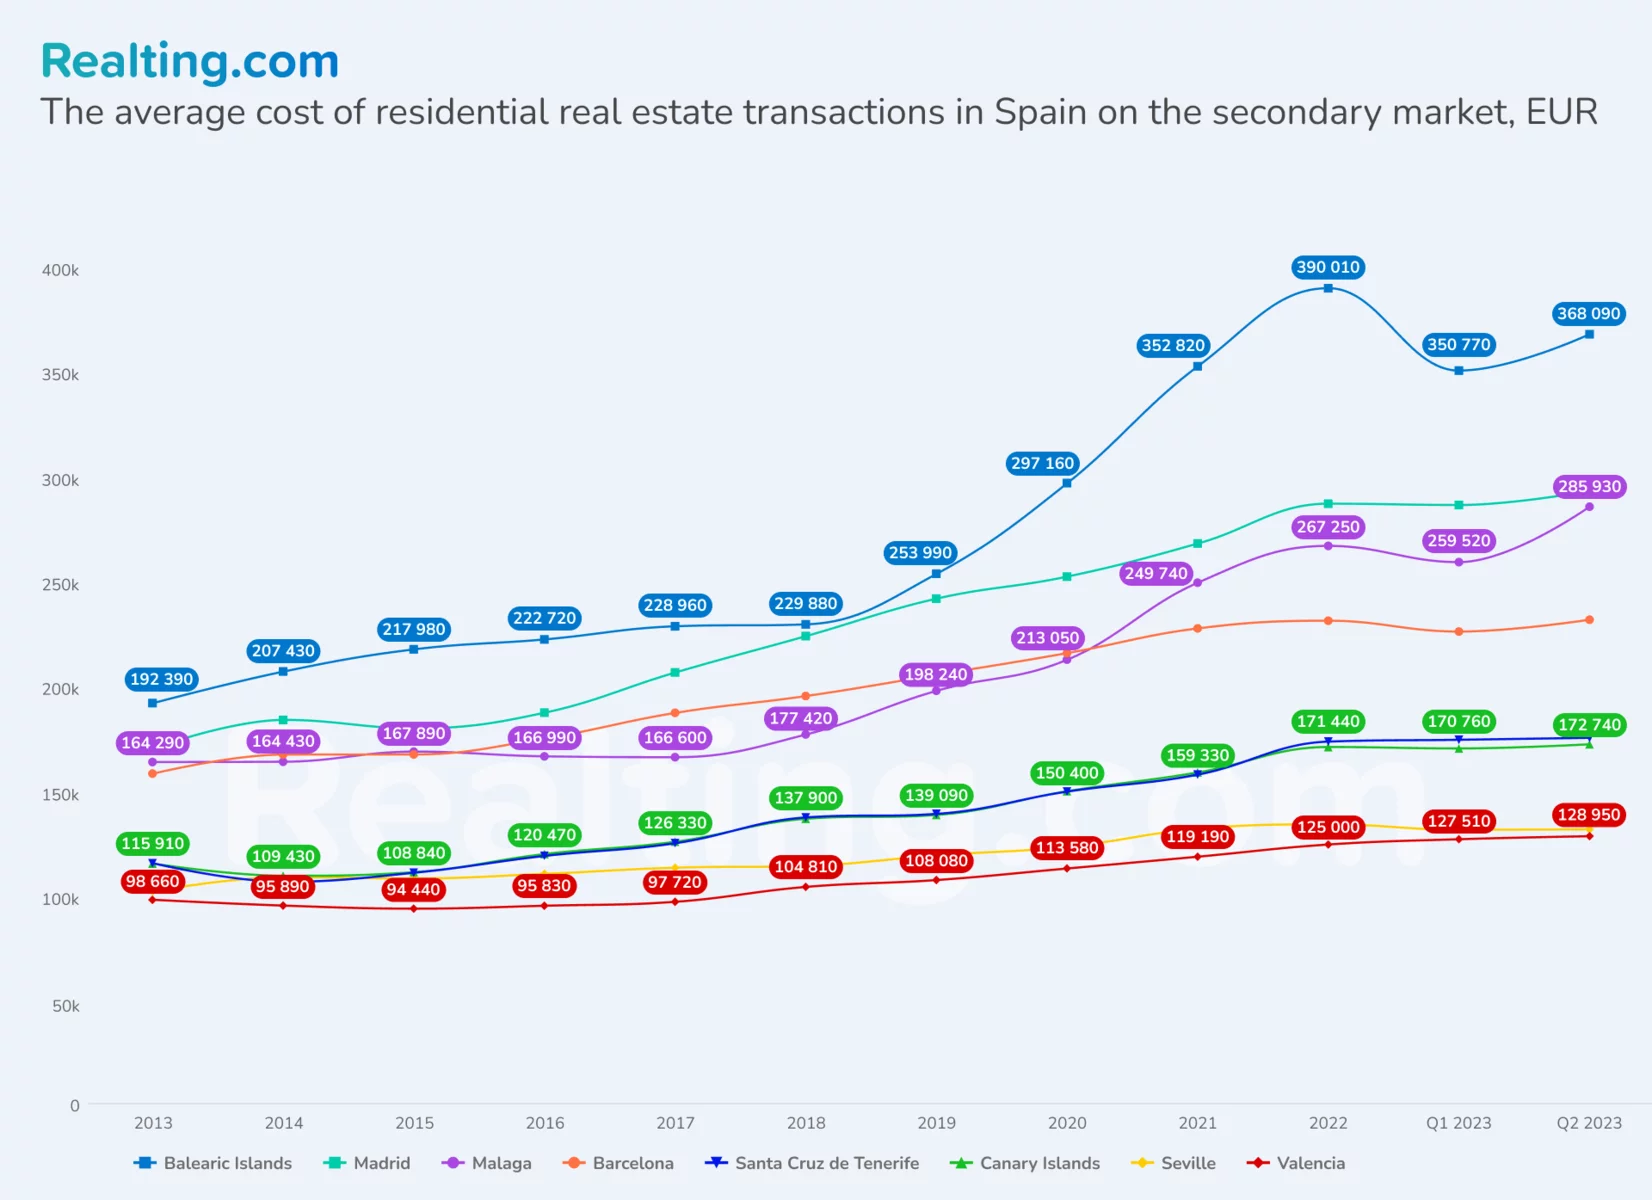 The average cost of residential real estate transactions in Spain on the secondary market, EUR